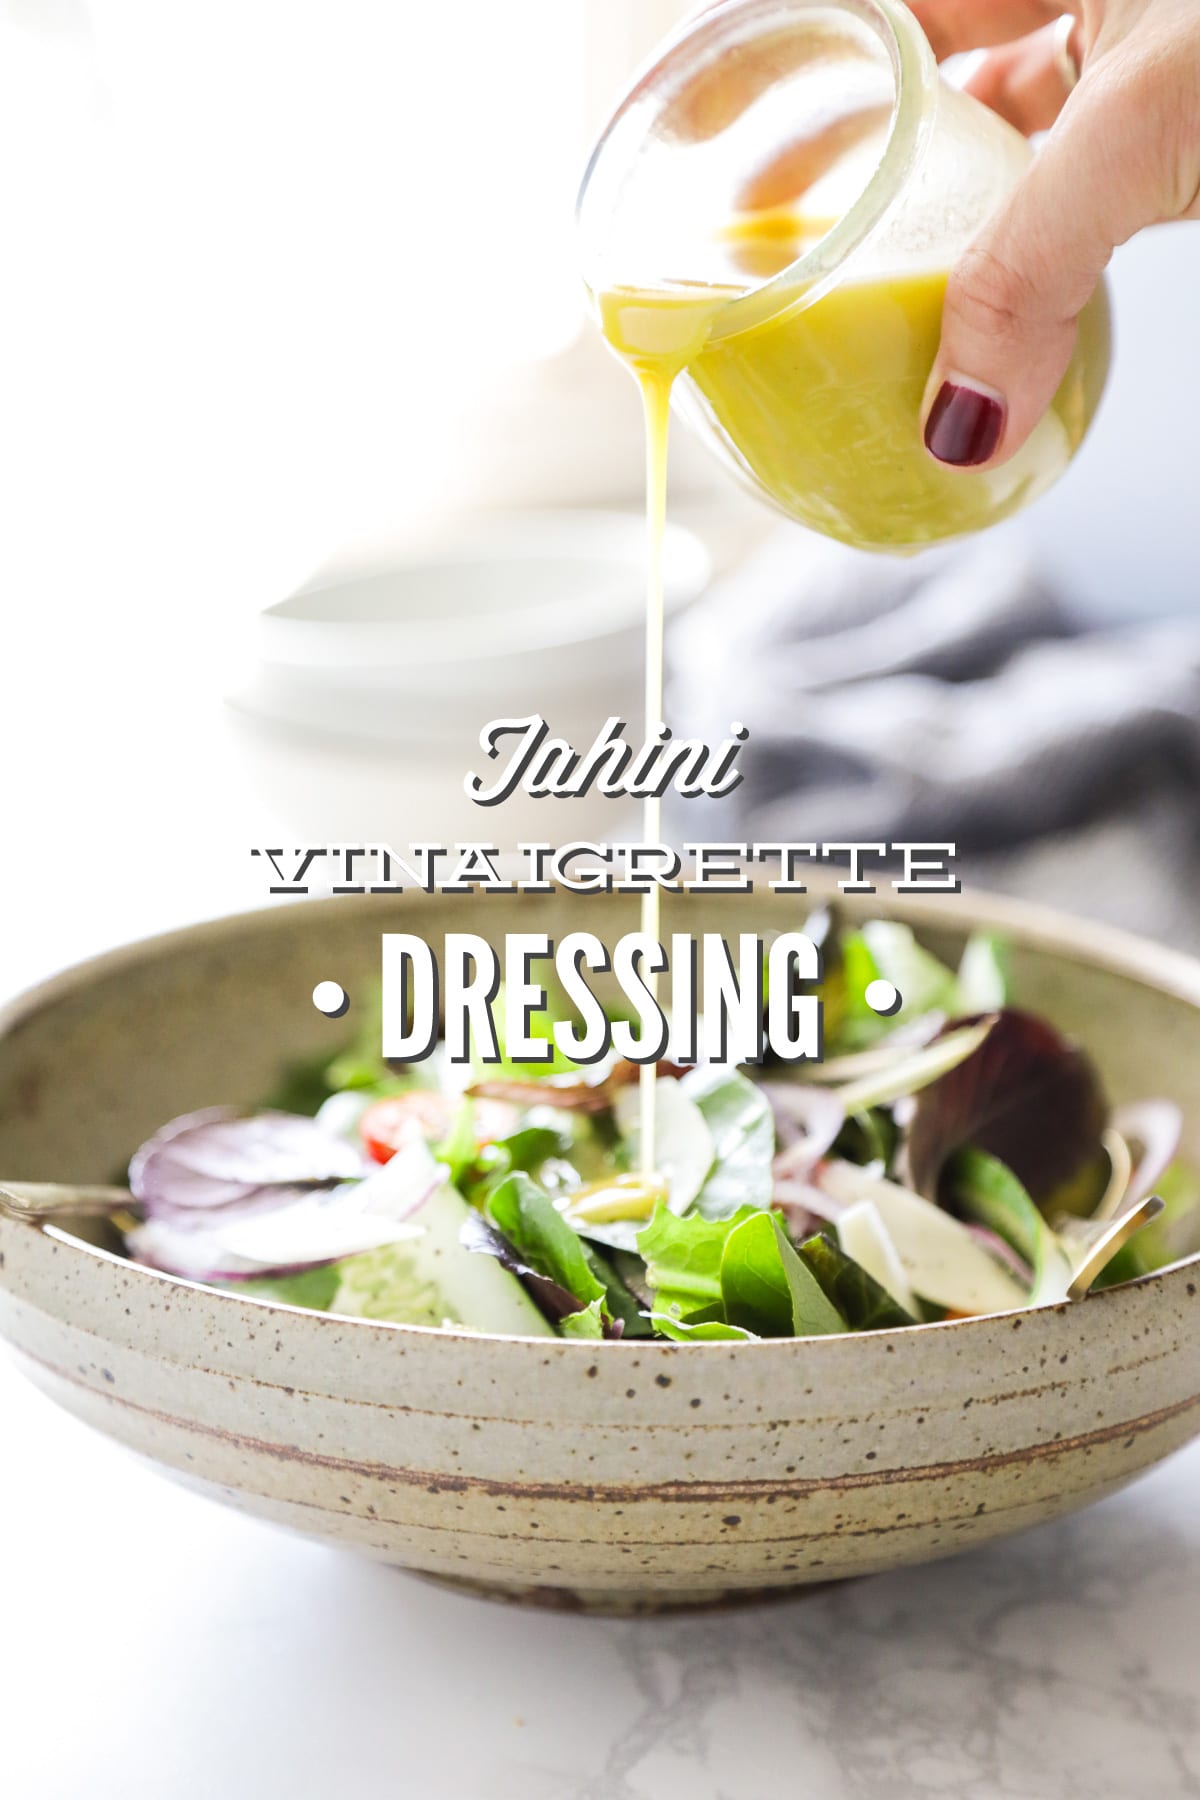 Pouring salad dressing over a leafy green salad. 